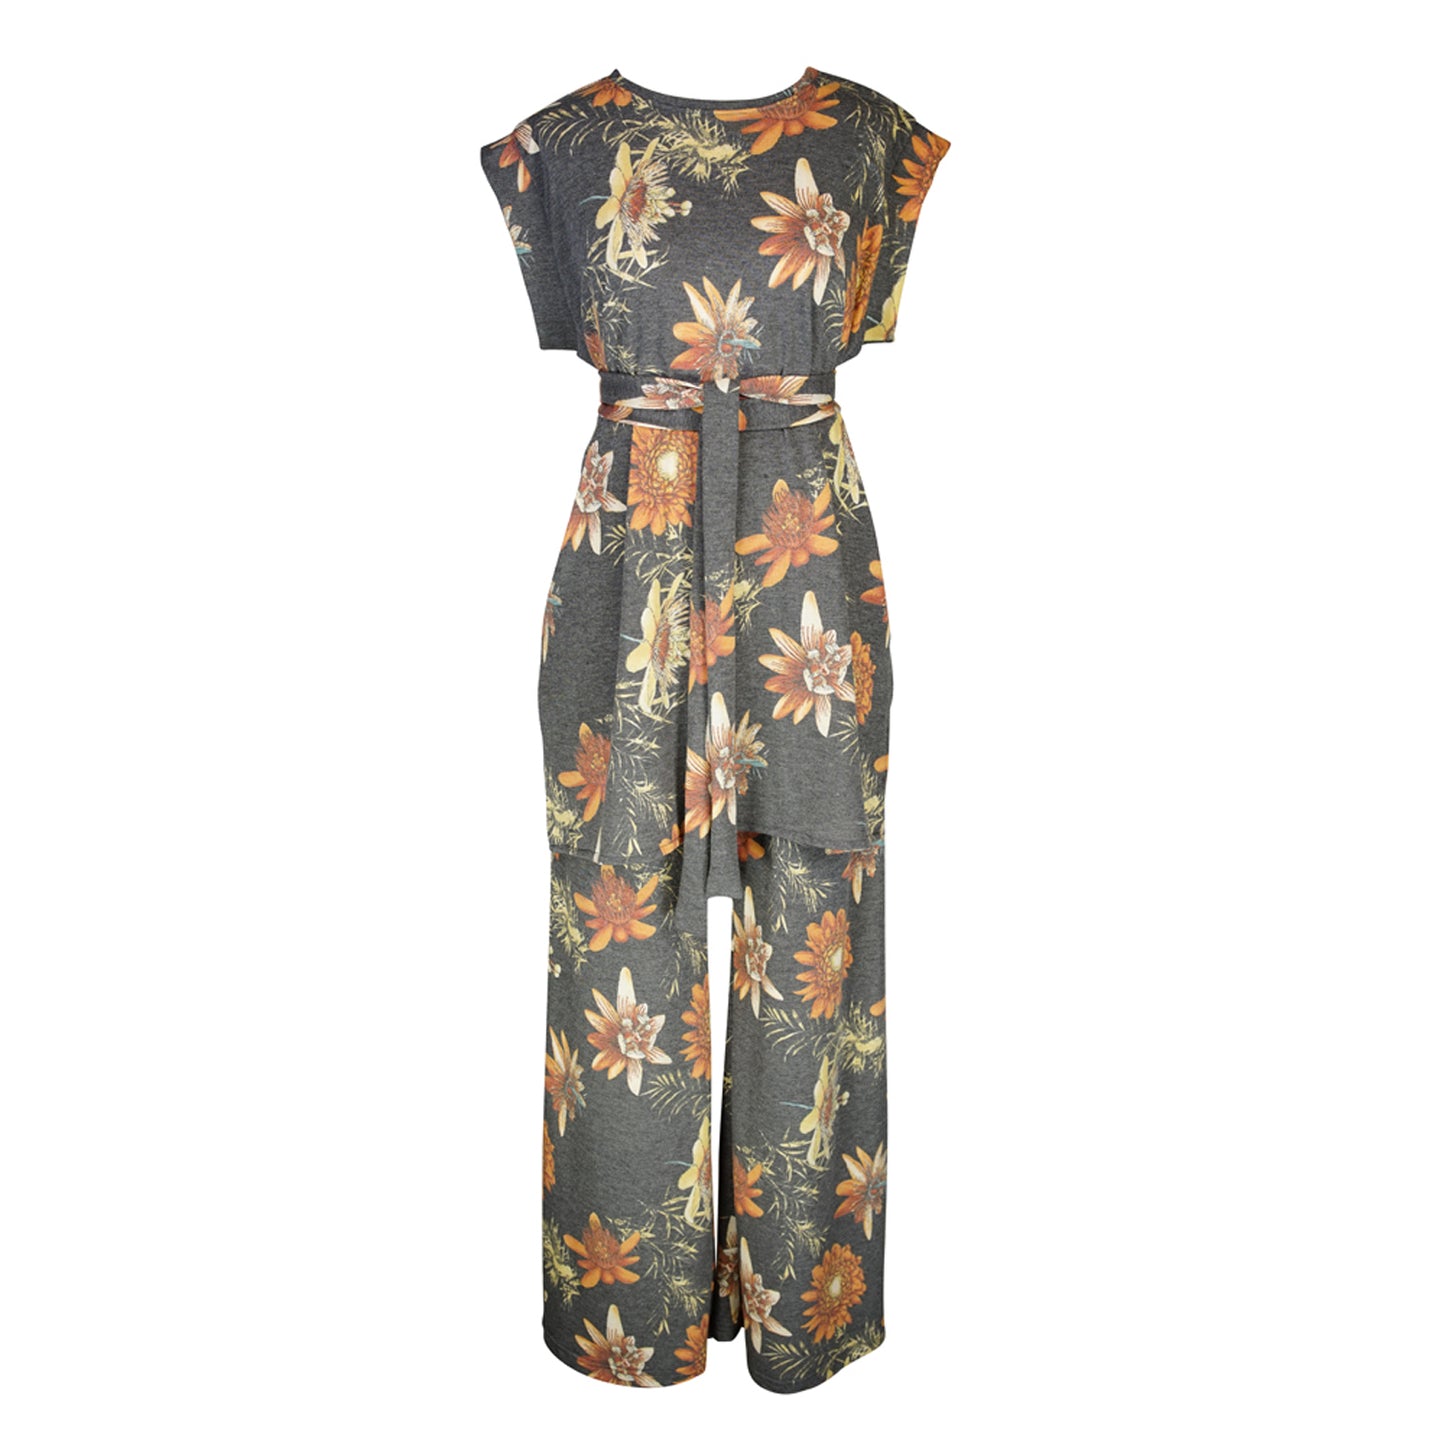 Tunic top and palazzo pant set made from a luxe jersey. Charcoal gray base with orange floral print. Featuring tab sleeves, side slits and an extended obi-style belt on the top, and pockets, elastic waist and a soft hidden drawstring on the bottoms.